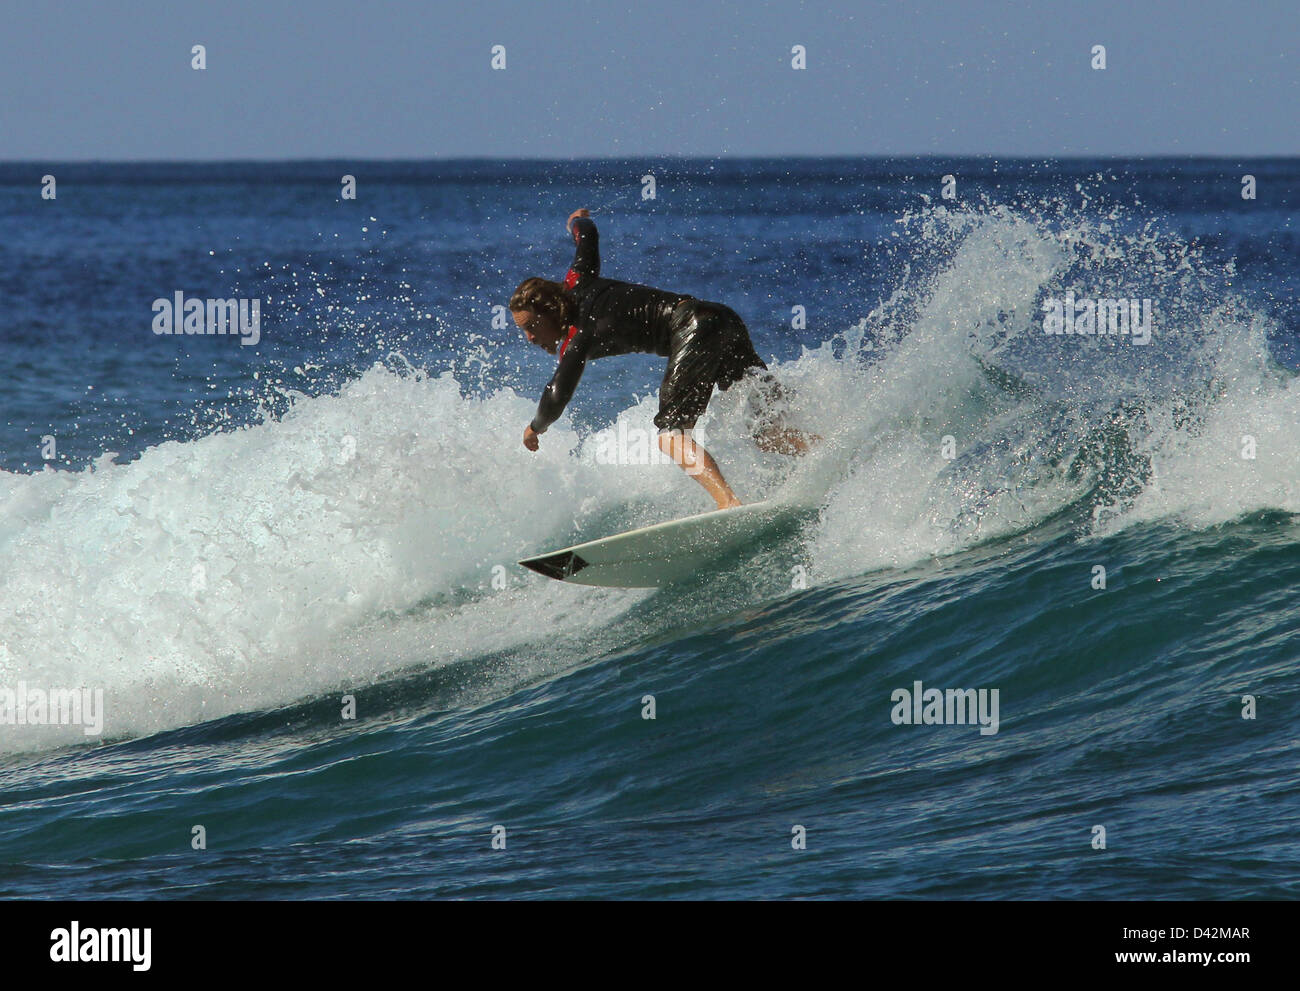 surfer riding wave Hawaii the Big Island pacific ocean surf surfing Stock Photo